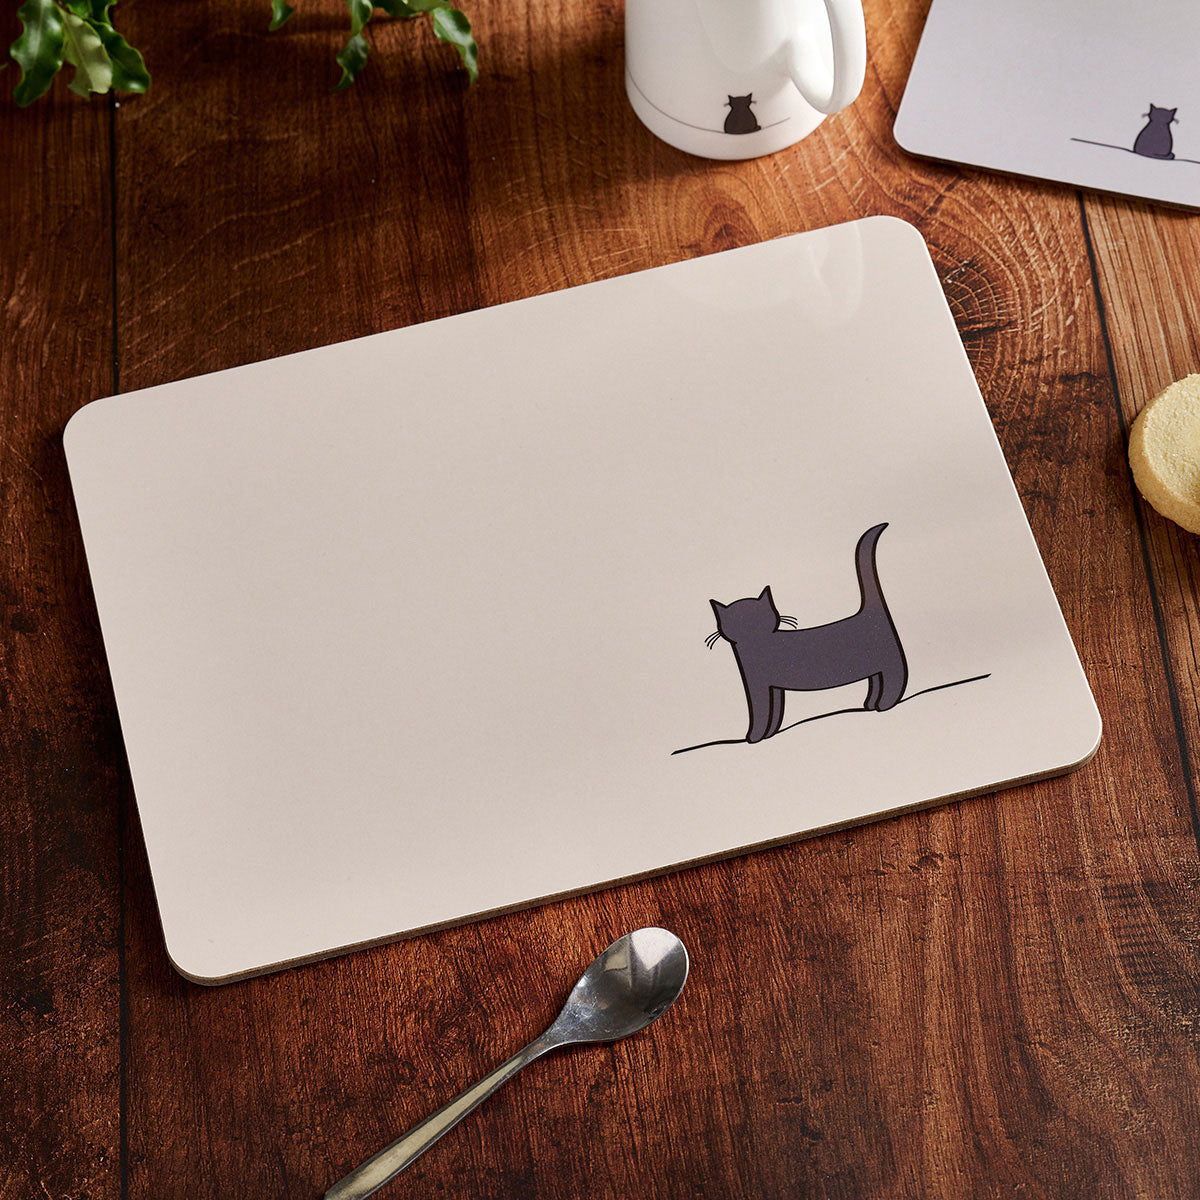 Standing Cat Placemat